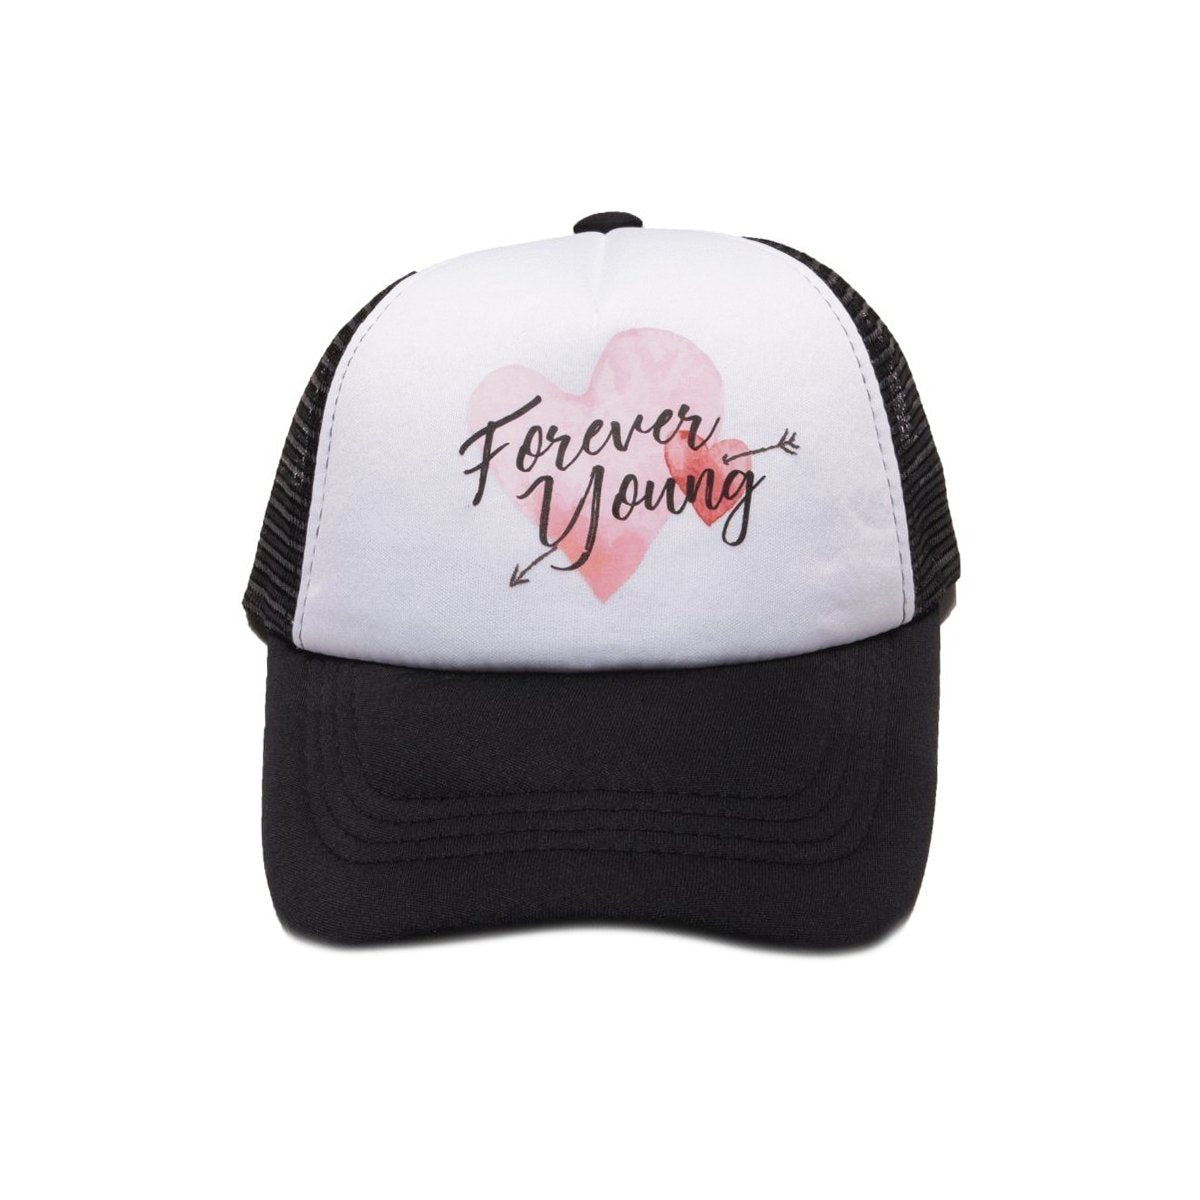 FOREVER YOUNG HAT - HATS